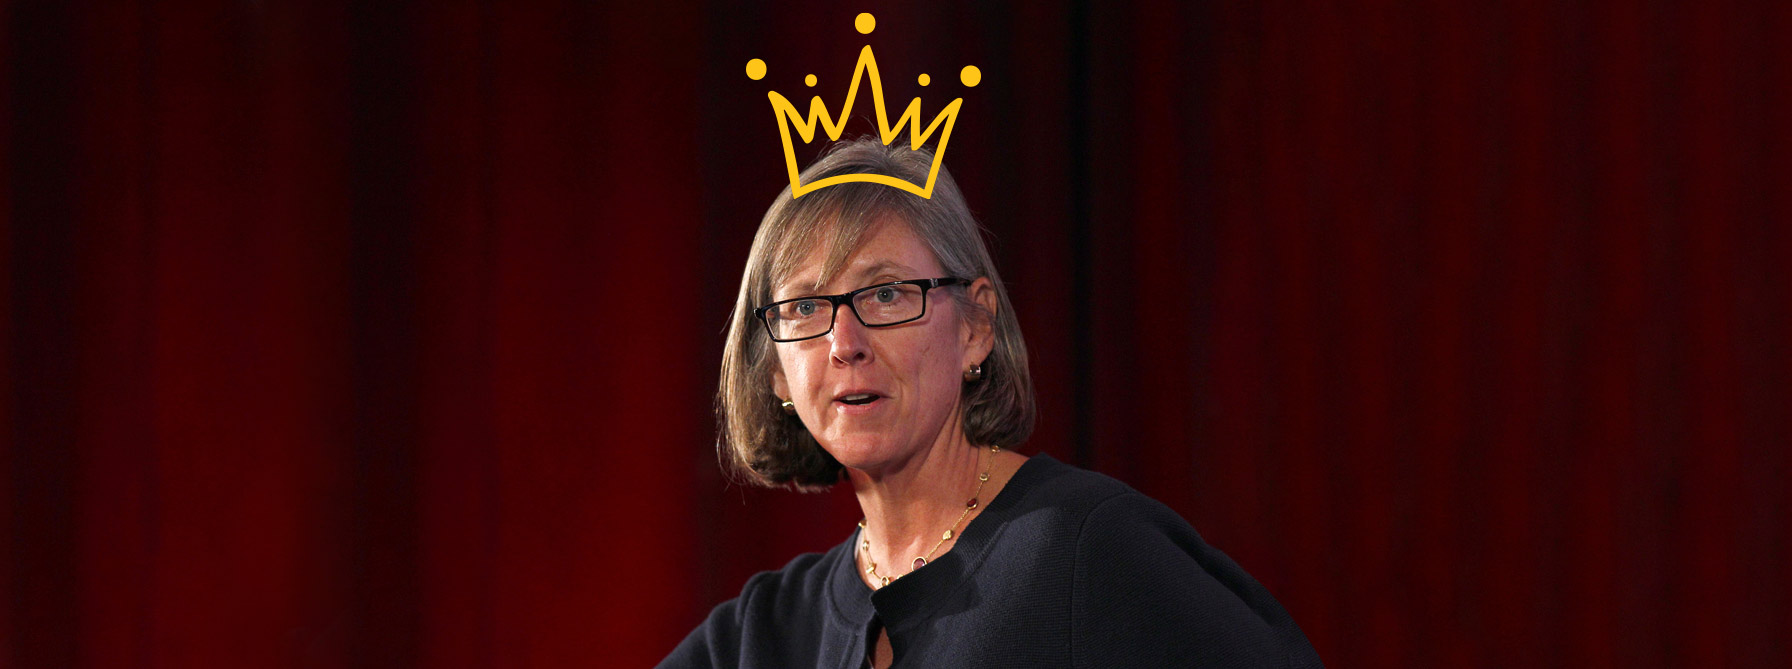 Mary Meeker 7 internet trends for finance brands to watch